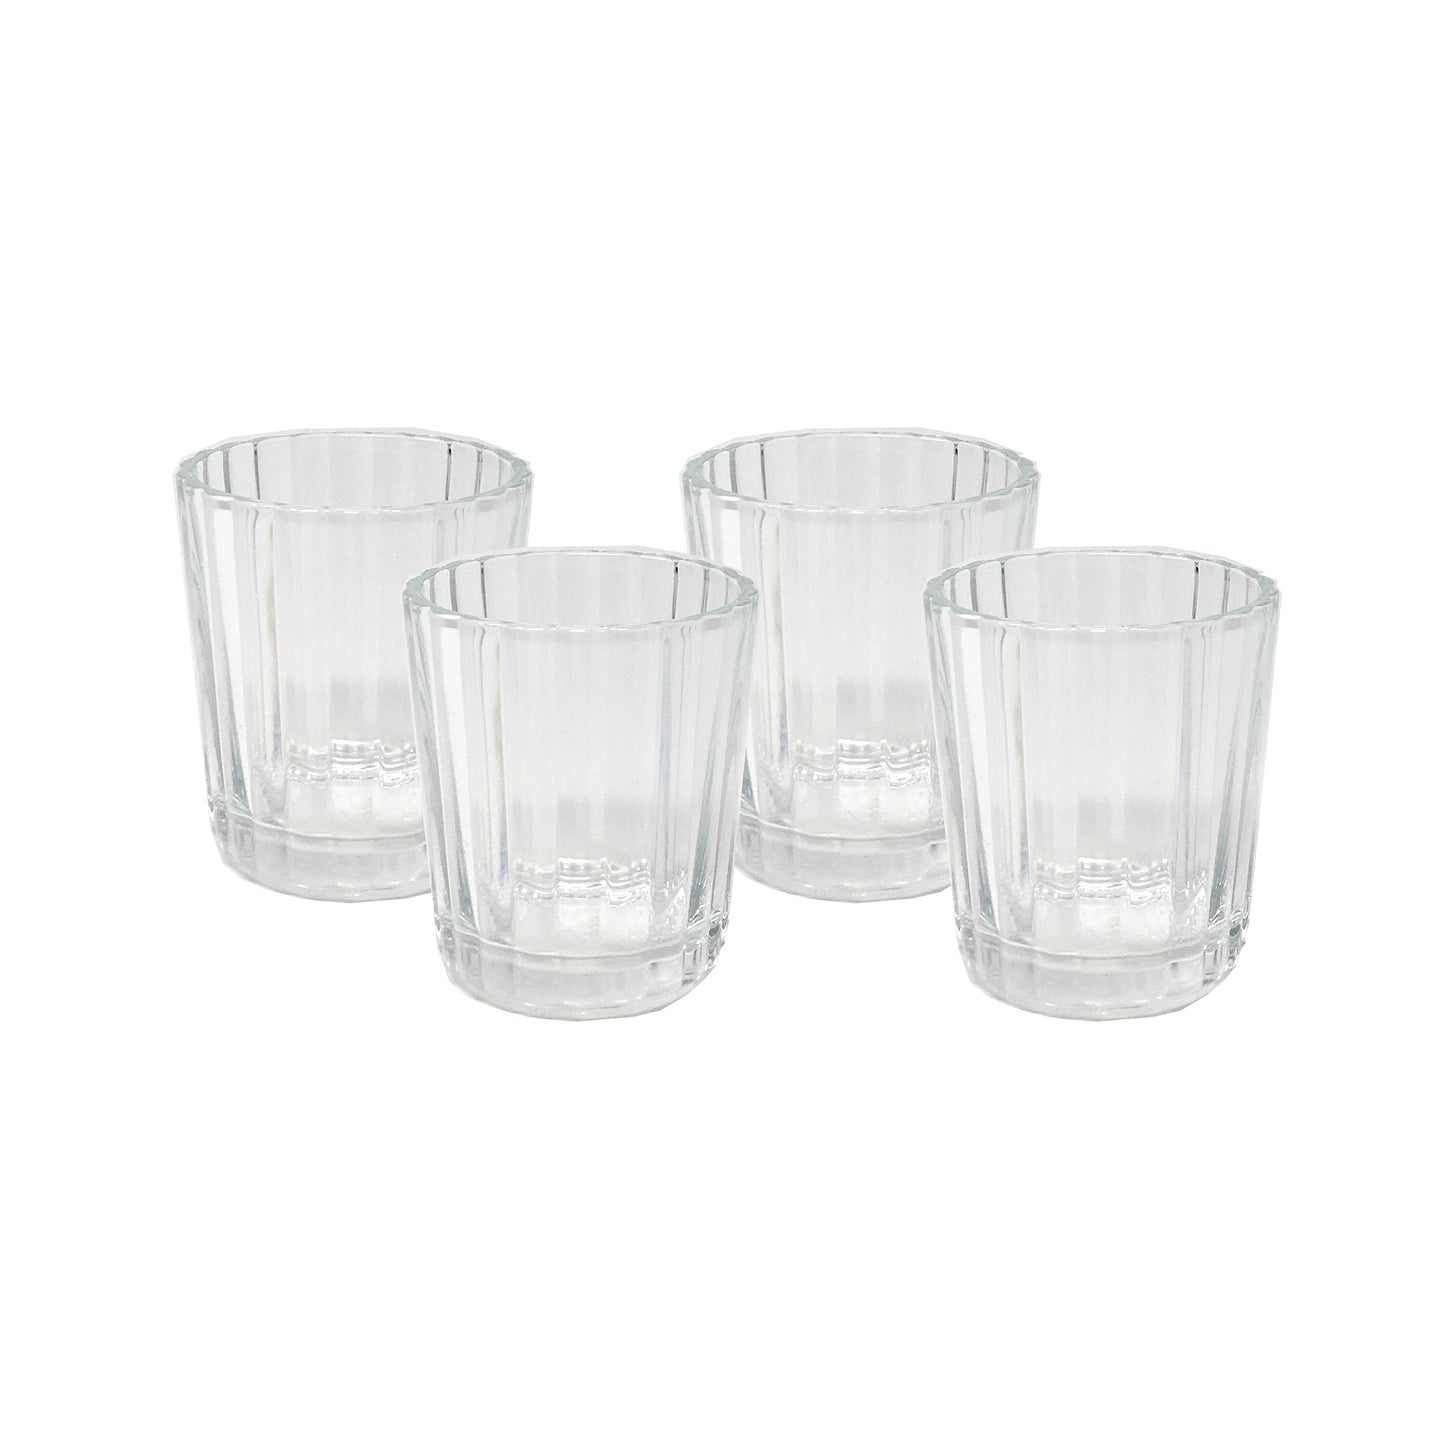 Vaso Veladora Mezcal or Tequila Shot Glasses from Mexico (Pack of 4)